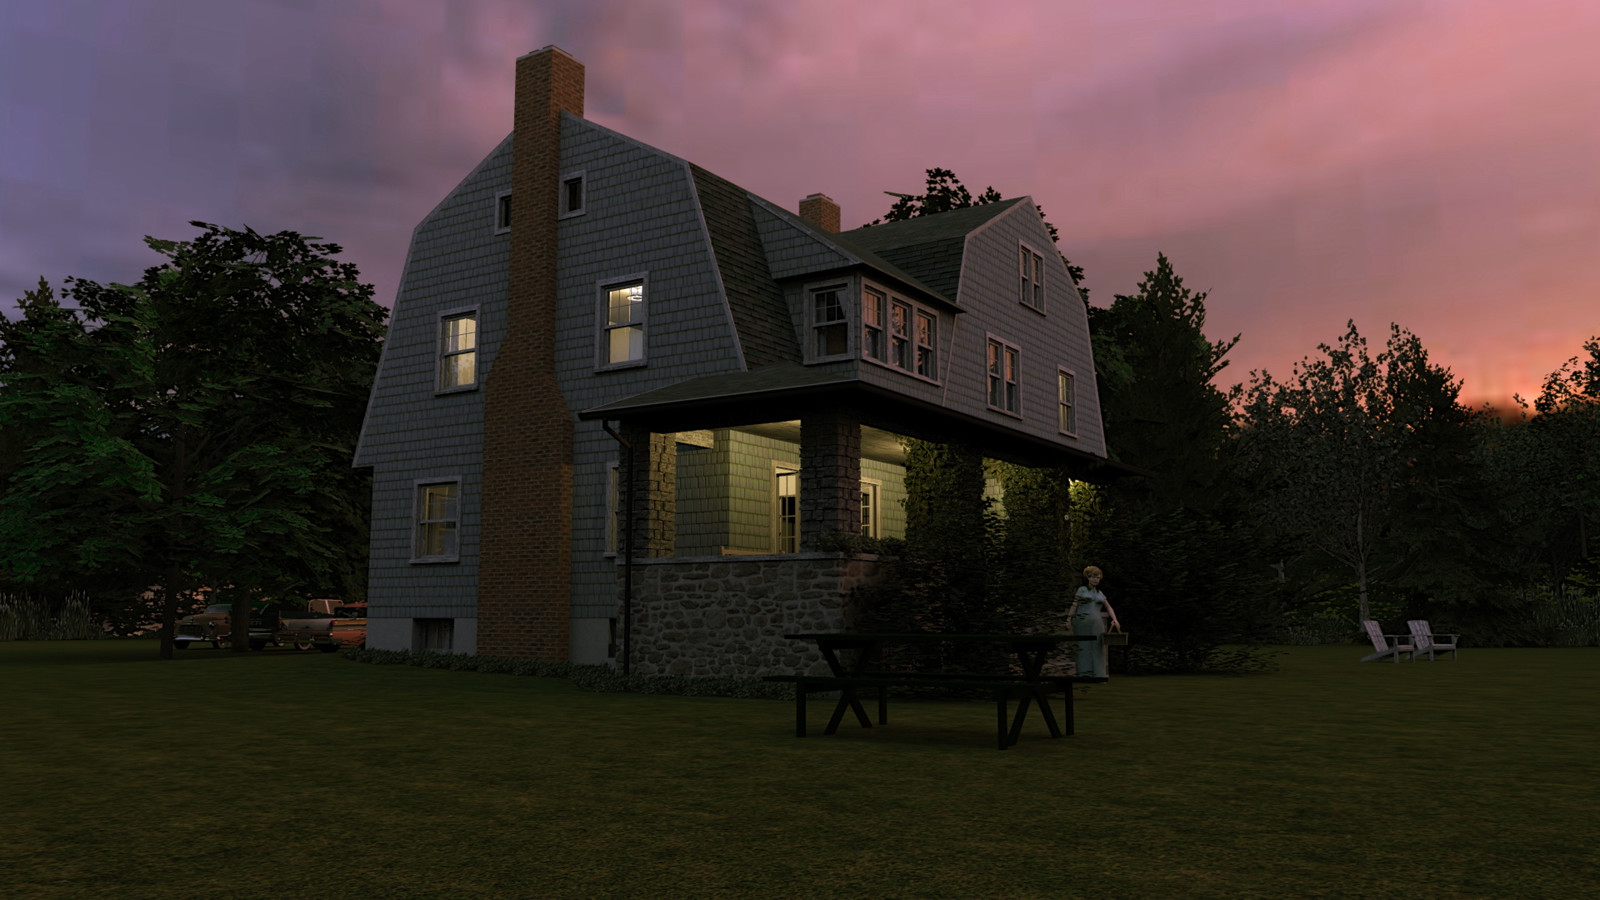 "Mason Farm - Supper Run For The Boys" Magic Hour Collection

25 Masonfarm HD1080 16 - iP Kodac

"SketchUp to LayOut" The Mason Farm Renders for the launching of the new book
"SketchUp to LayOut" http://bit.ly/2j0d0Wh by MasterSketchup.